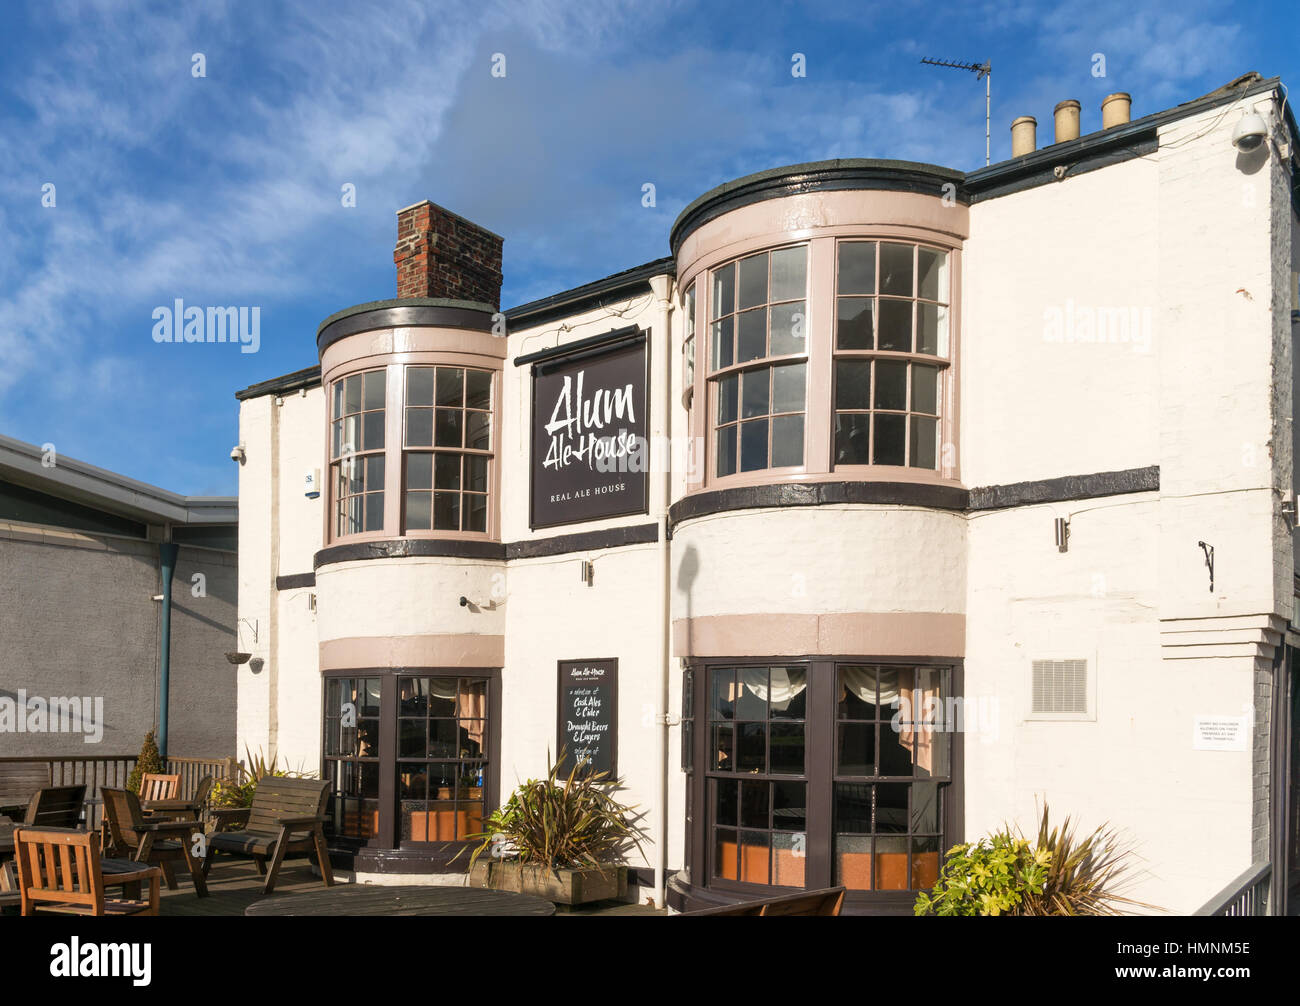 Der Alaun Ale House, historische Kneipe in South Shields, Nord-Ost-England, UK Stockfoto